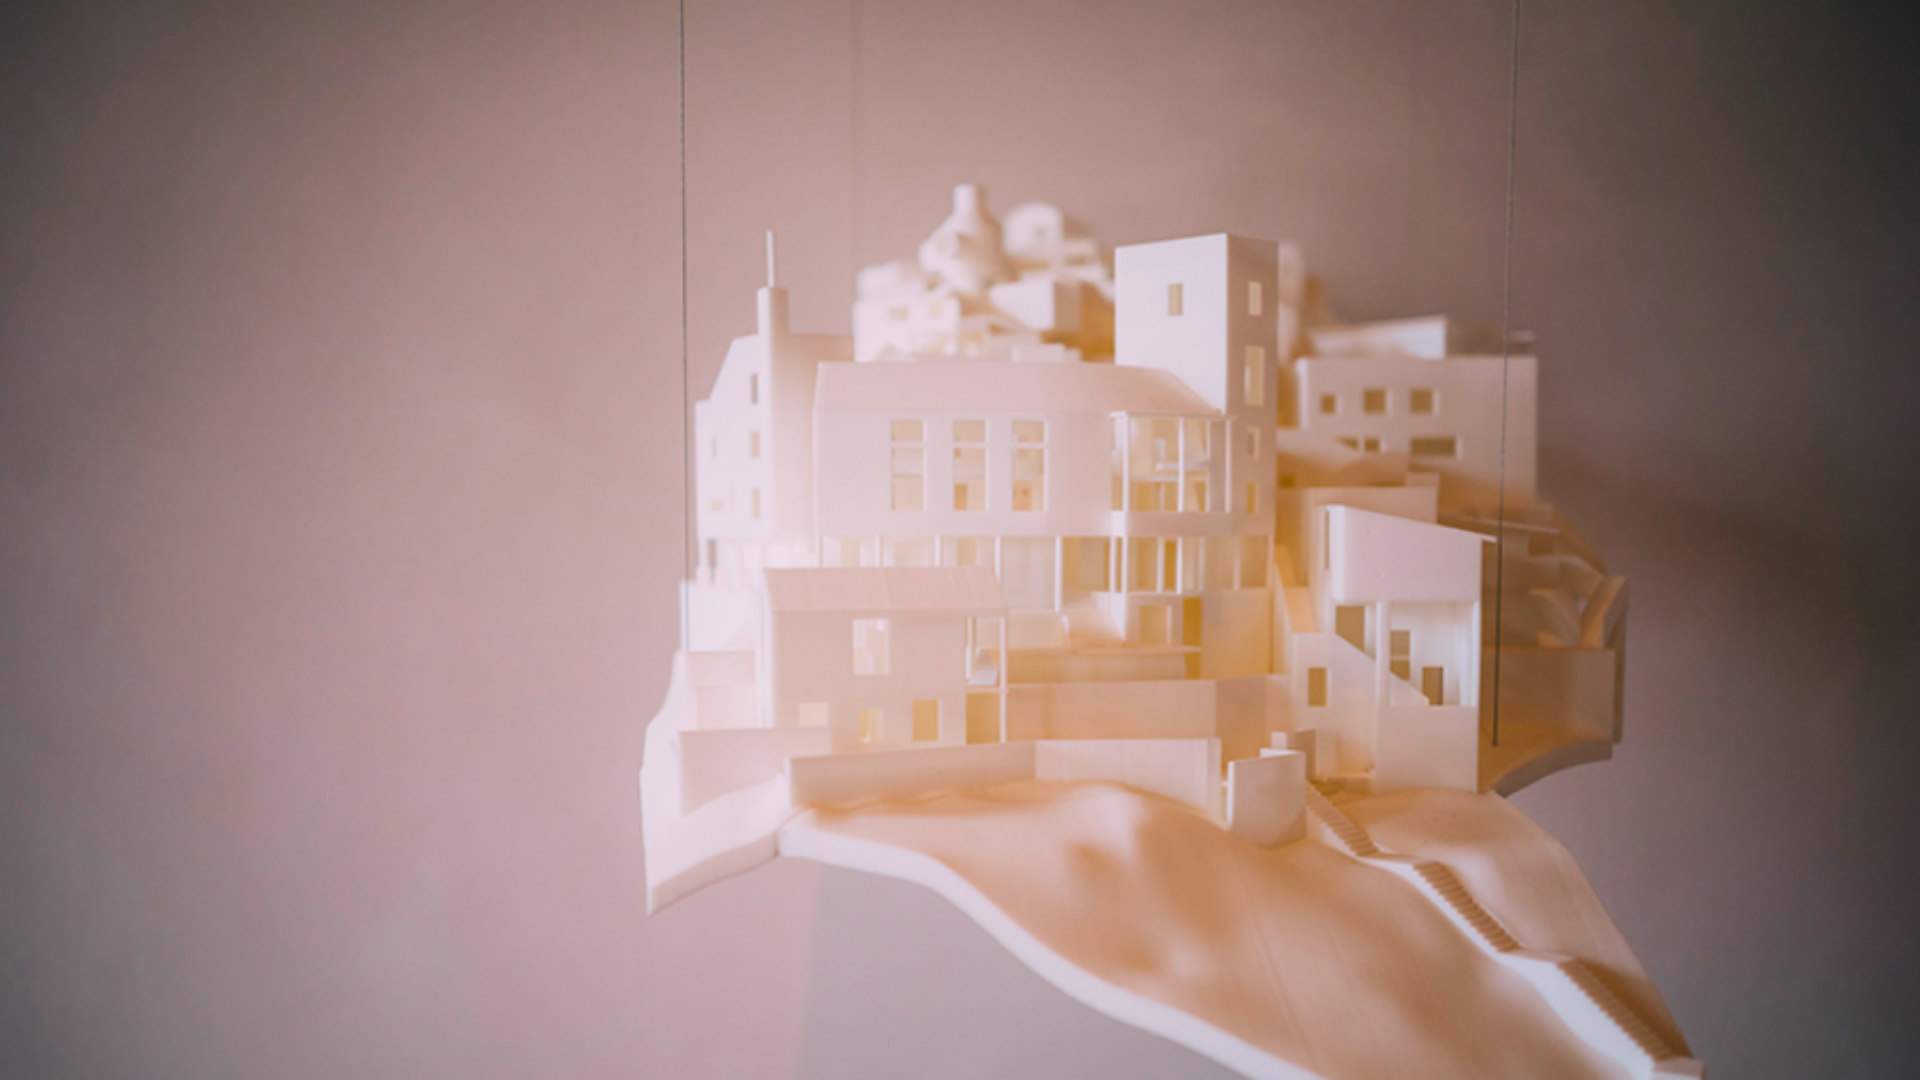 Future Islands: The New Zealand Exhibition at the 2016 Venice Architecture Biennale